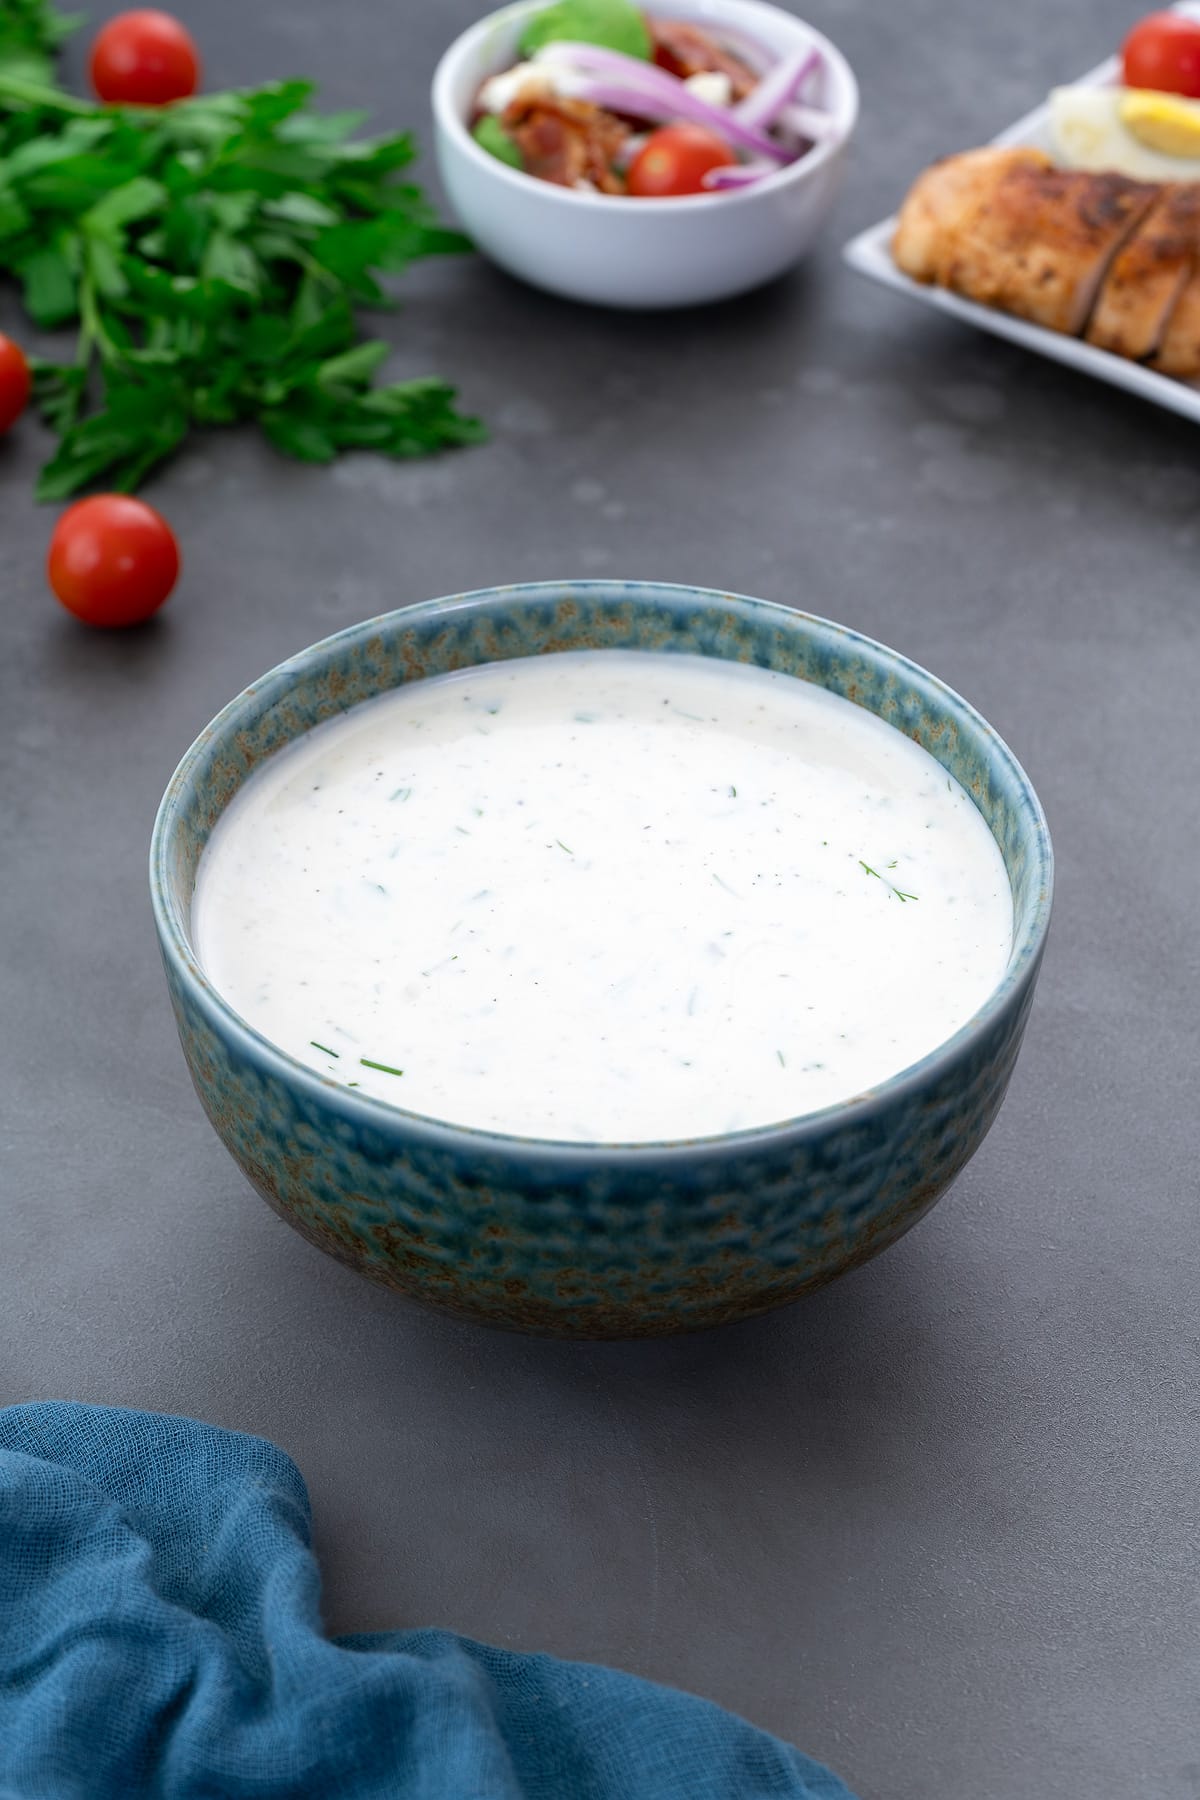 Appetizing fresh homemade ranch dressing in a green and blue patterned bowl on a grey table. Parsley leaves and cherry tomatoes are arranged around the bowl, accompanied by salad and chicken breast in a small cup and a plate.